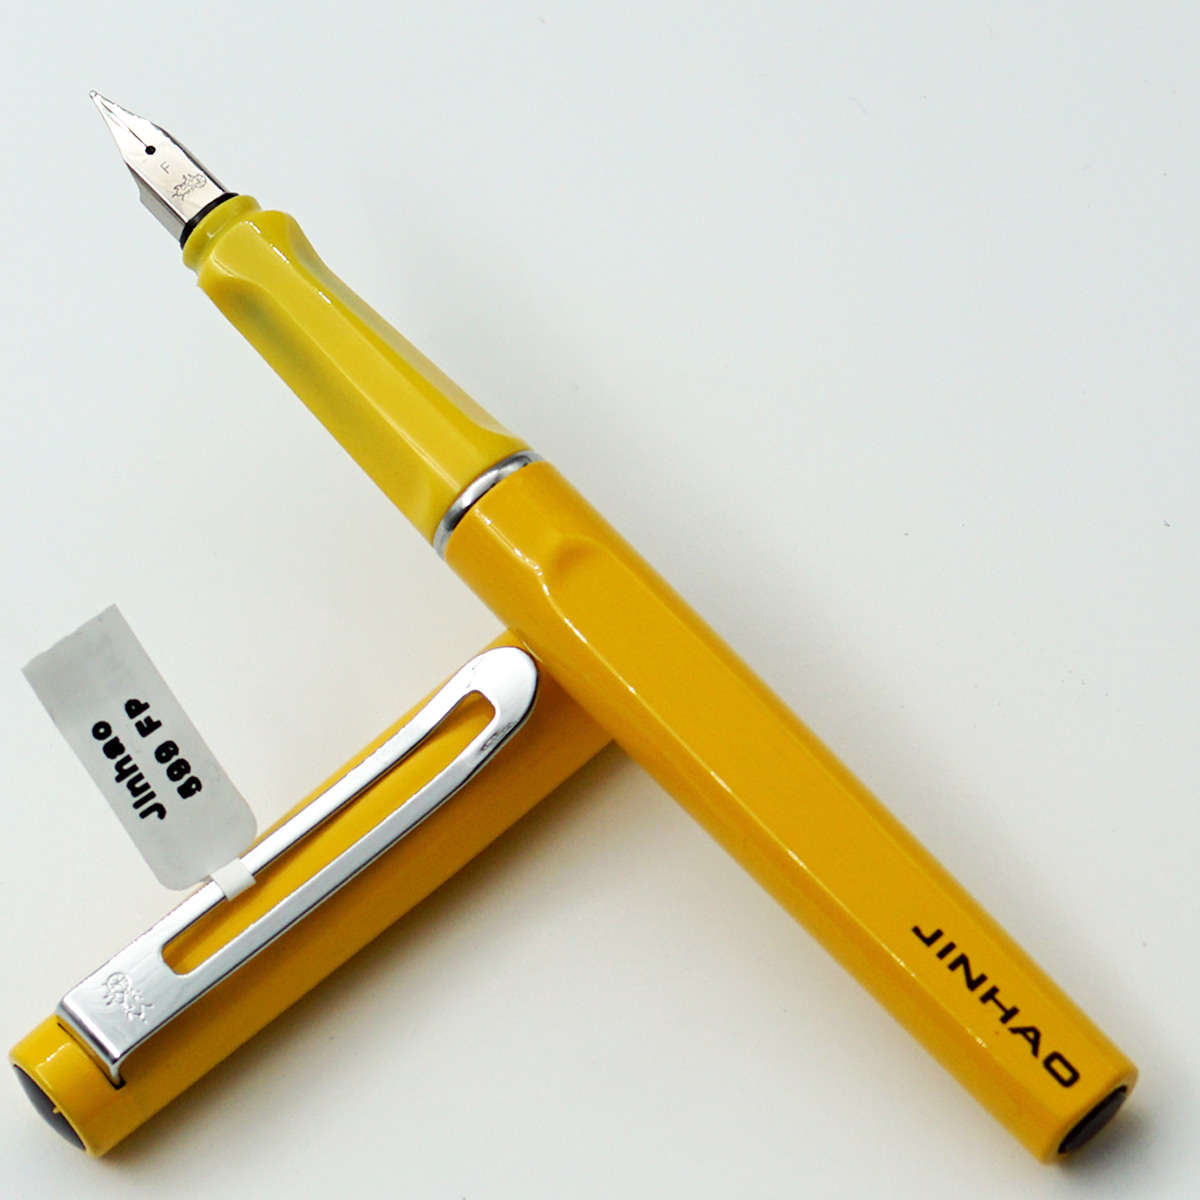 Jinhao 599 Yellow Color Body With 5.5 Fine Nib With Silver Designed Clip Converter Type Fountain Pen SKU 24522